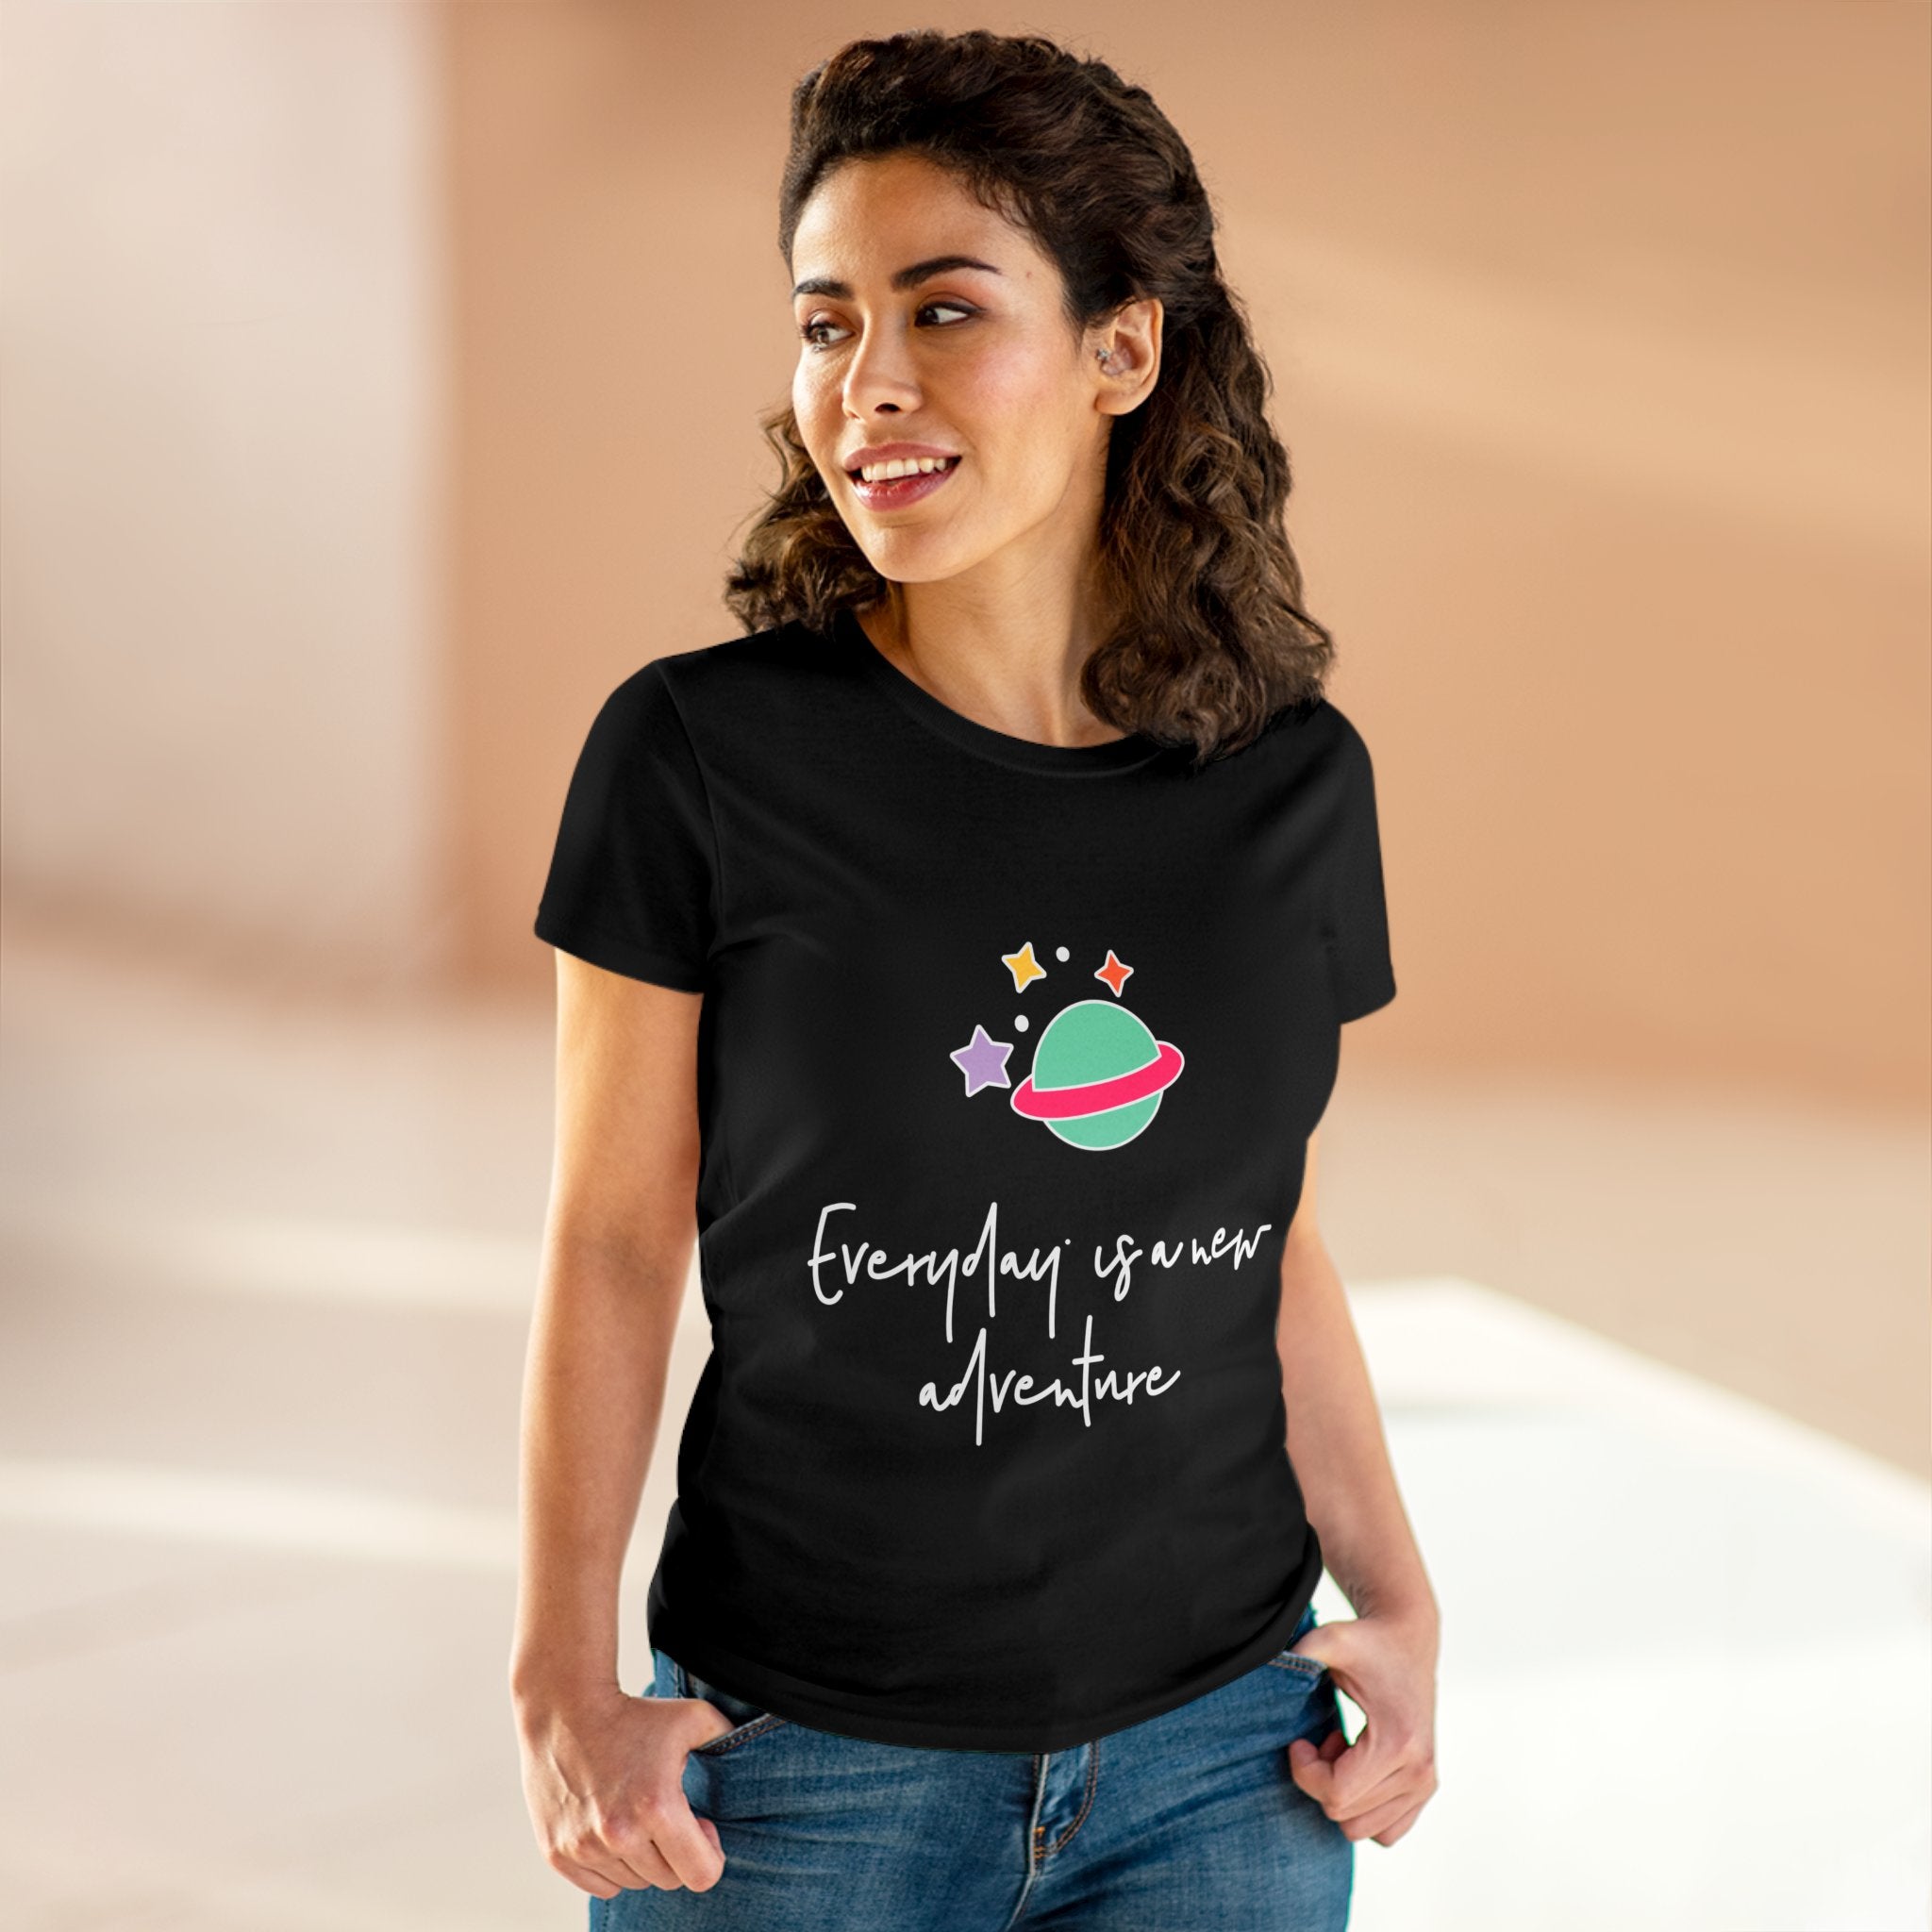 Everyday is a New Adventure - Women'sTee